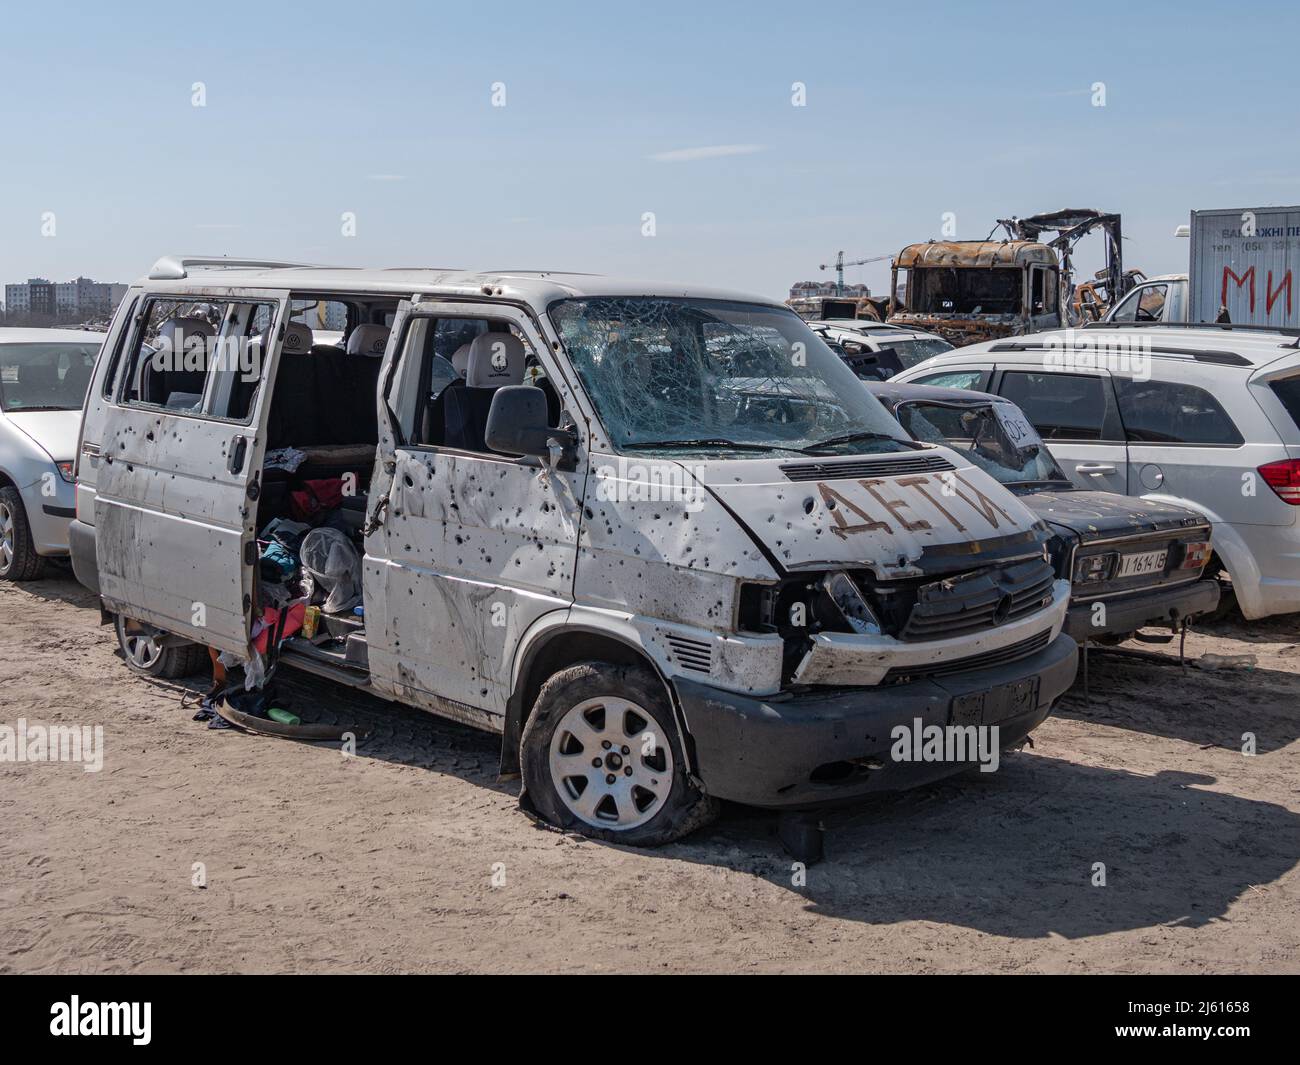 Bucha, Ukraine - April 2022: Minibus with the inscription CHILDREN was shot and slashed with fragments of mines. Dump of shot civilian cars by Russian occupiers in Ukraine. Stock Photo